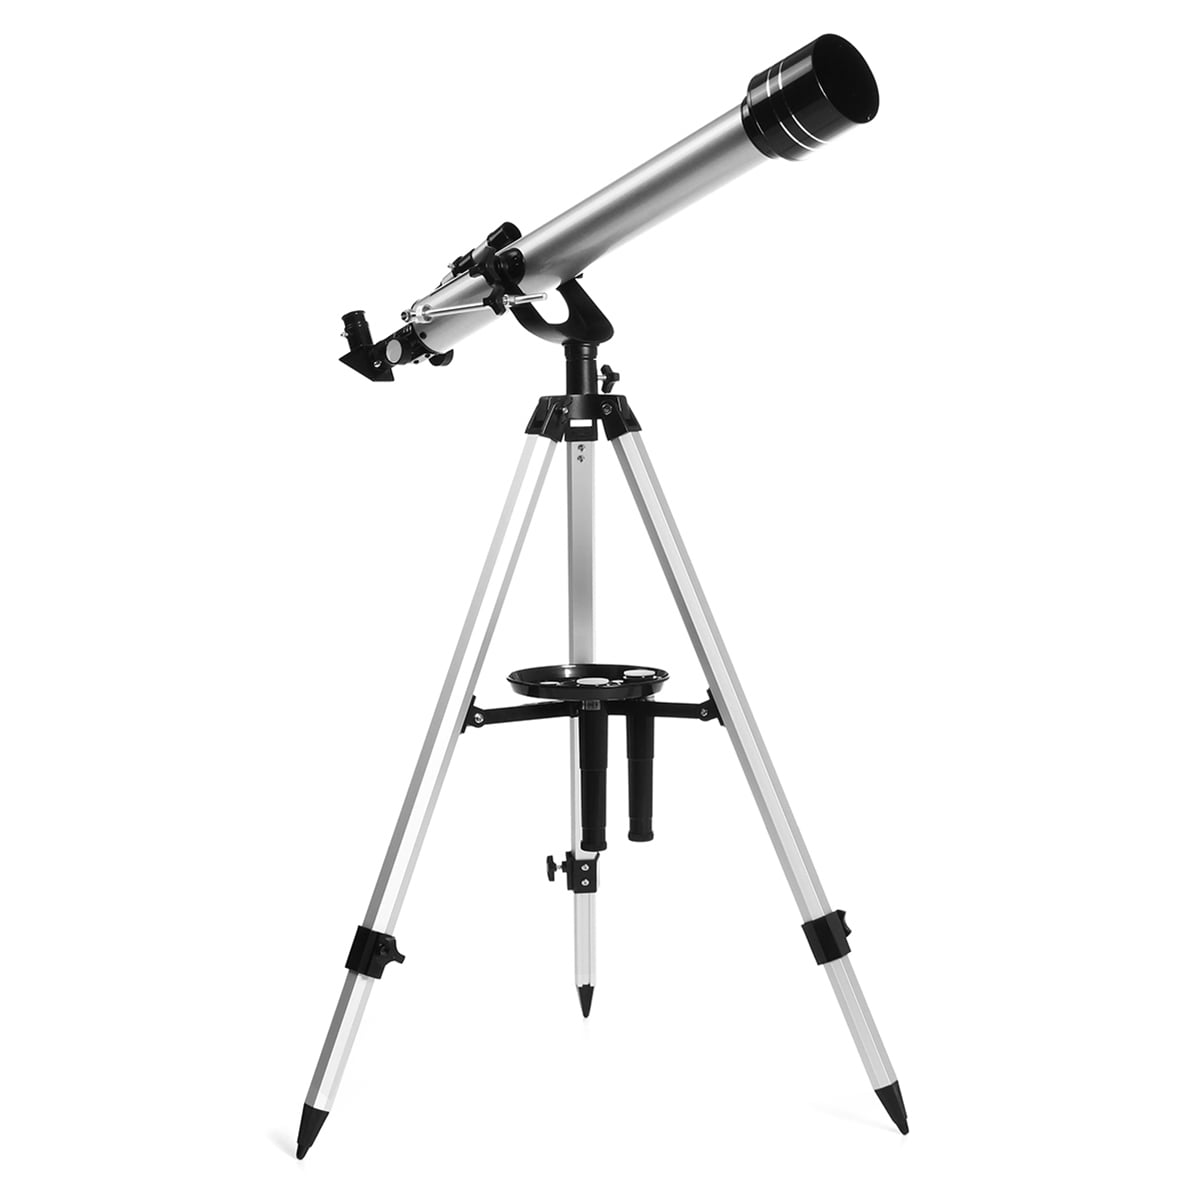 70 Mm Aperture Refractor Smartphone Adapter Portable Travel Mirror with Adjustable Tripod CRKY Hd Telescope for Beginners in Childrens Adult Astronomy 